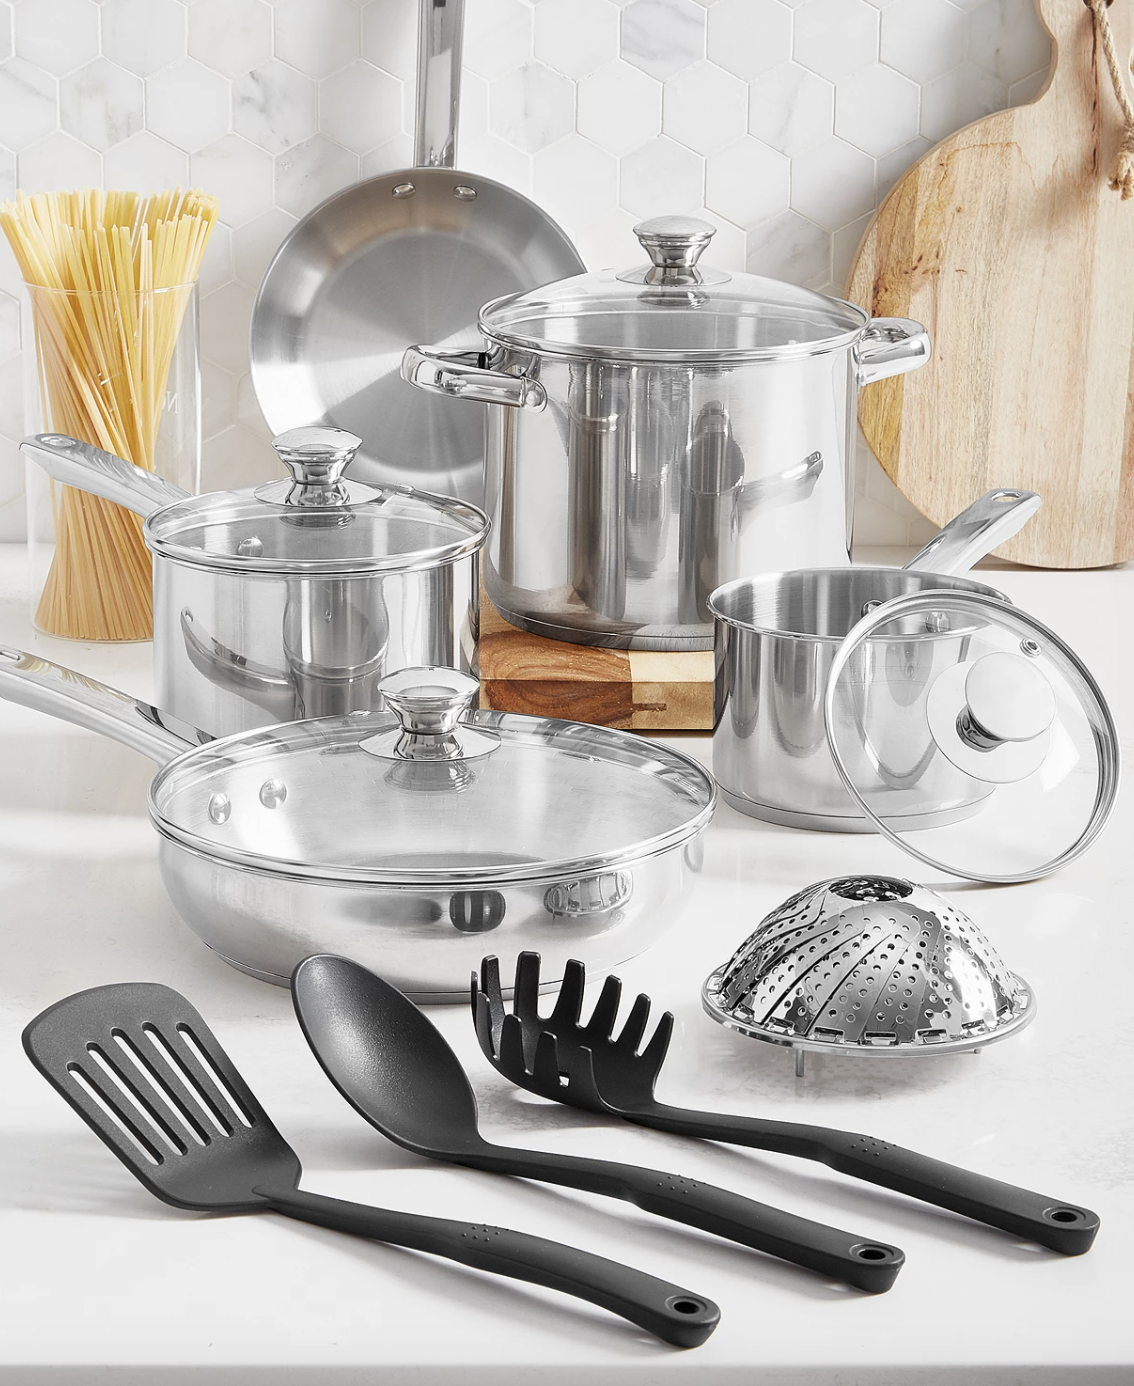 the cookware set styled on a counter showing every piece in the set